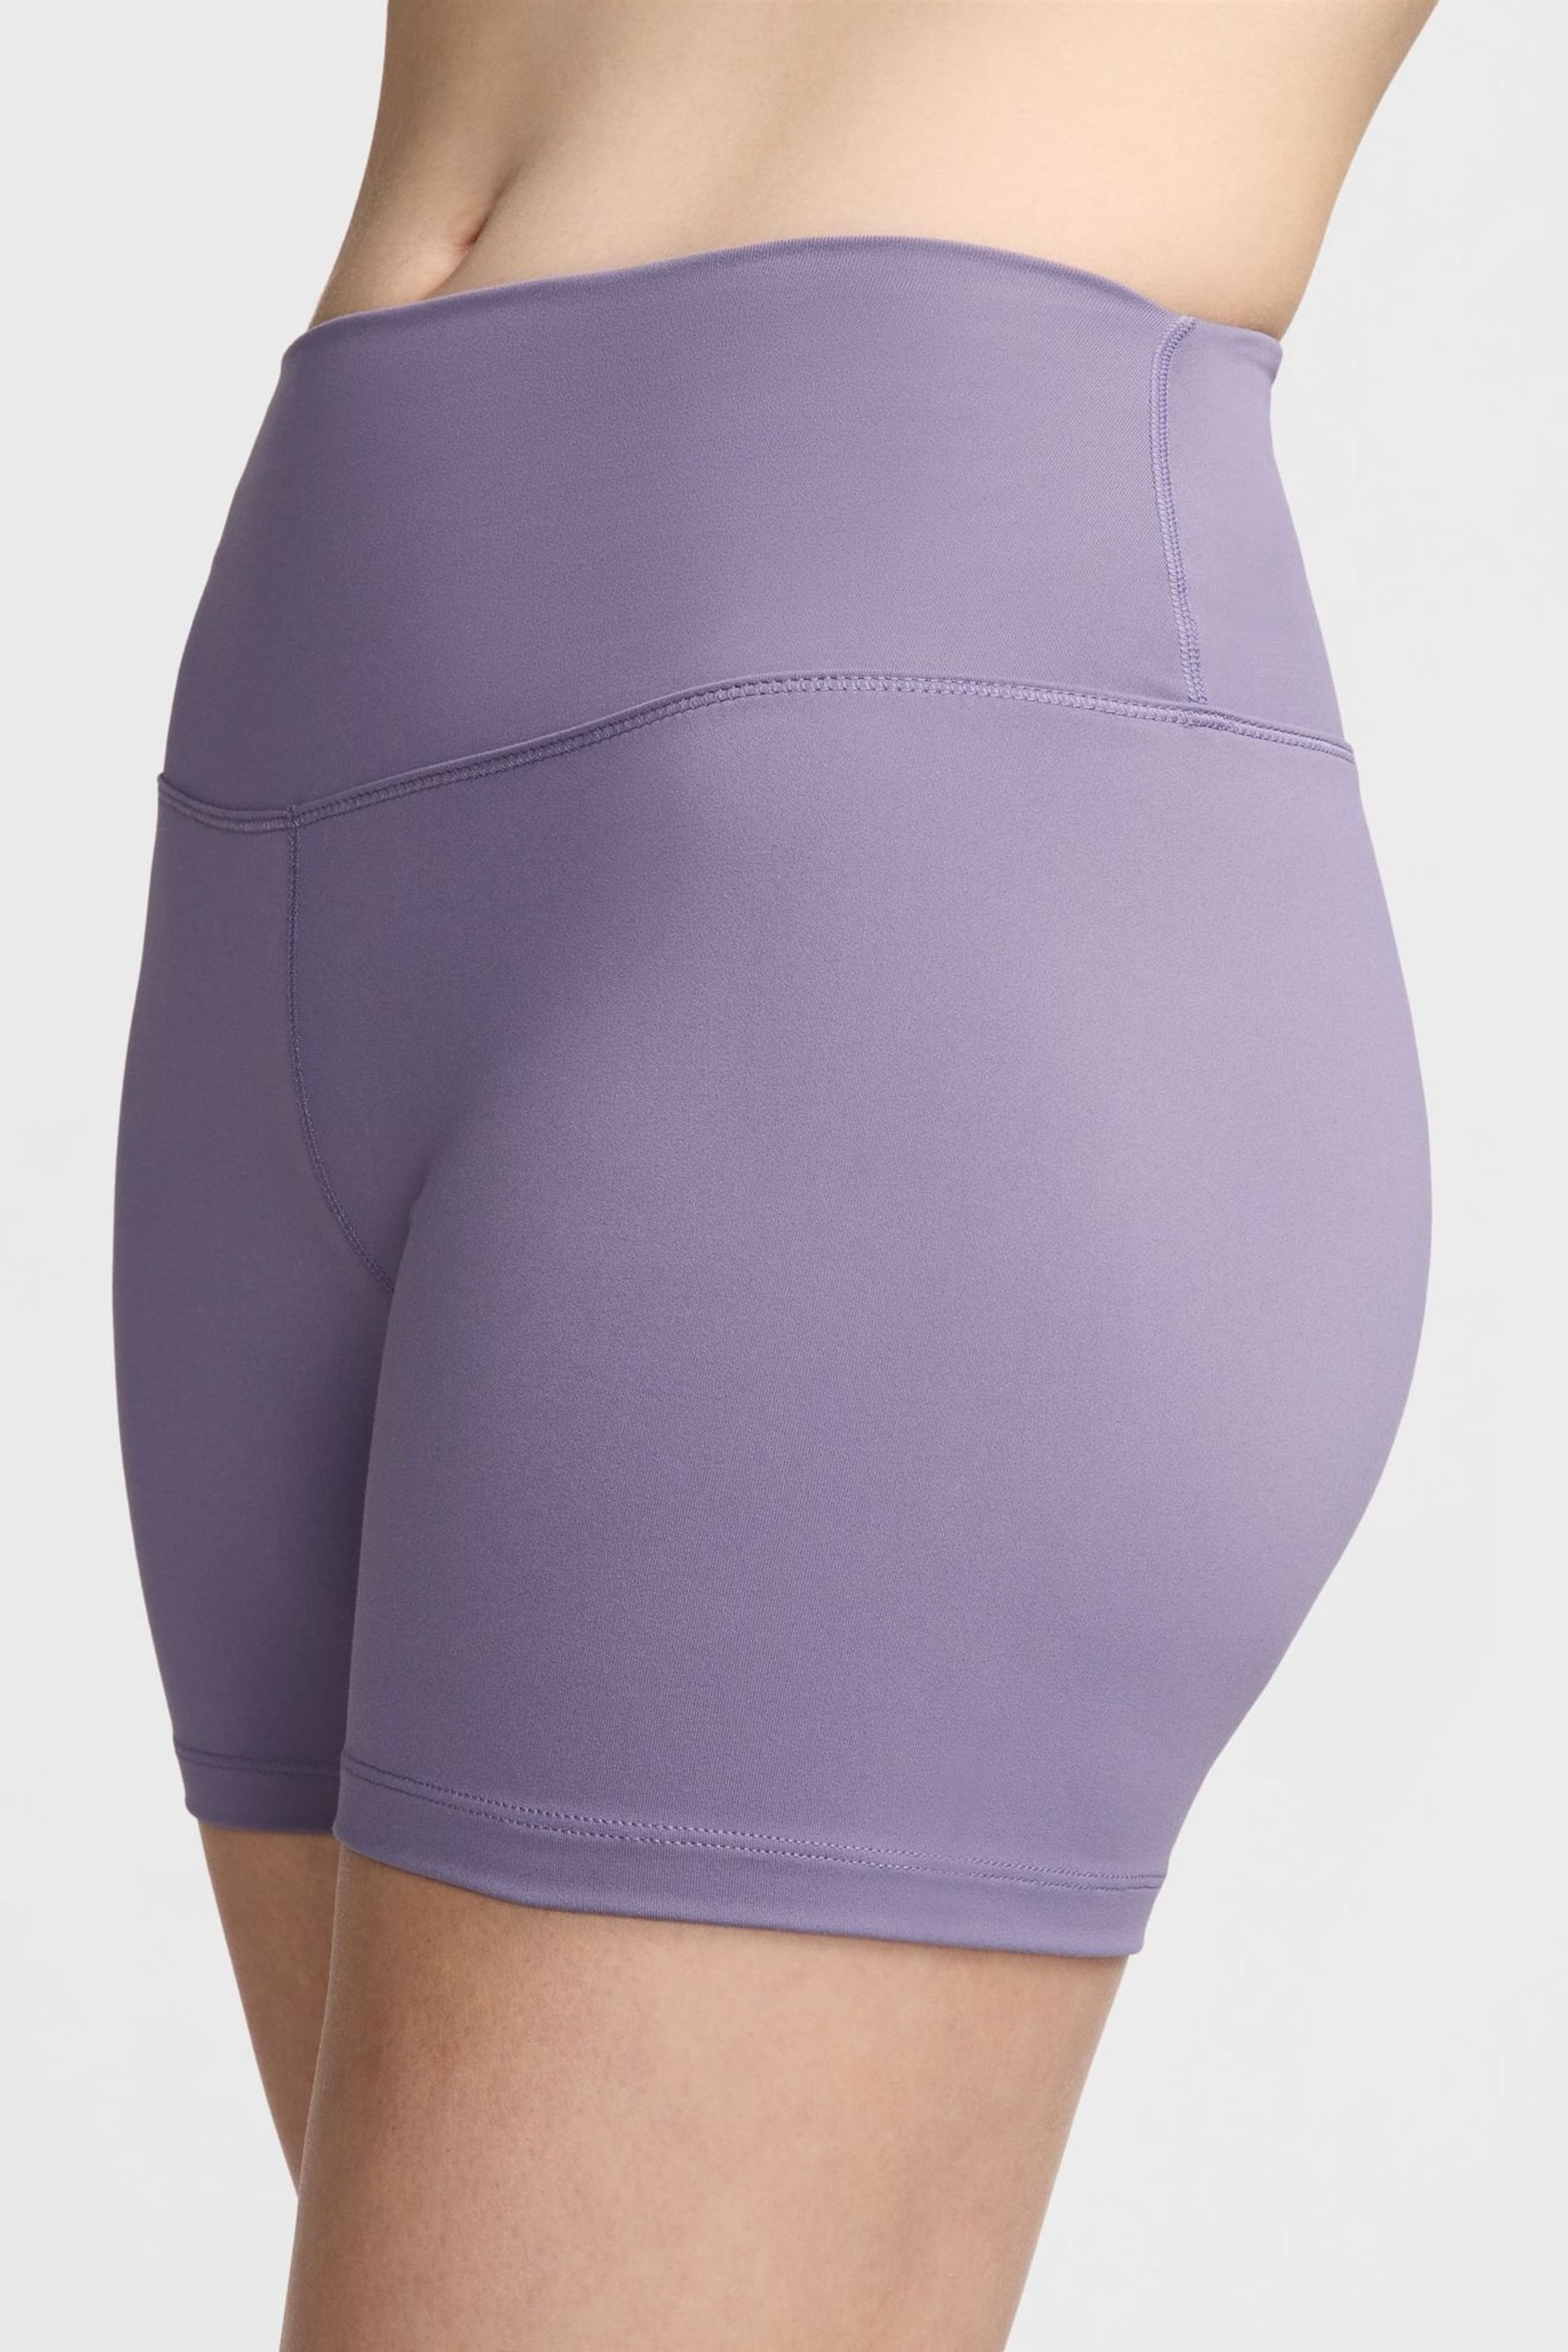 Nike Purple Dri-FIT One High Waisted 5 Cycling Shorts - Image 3 of 8